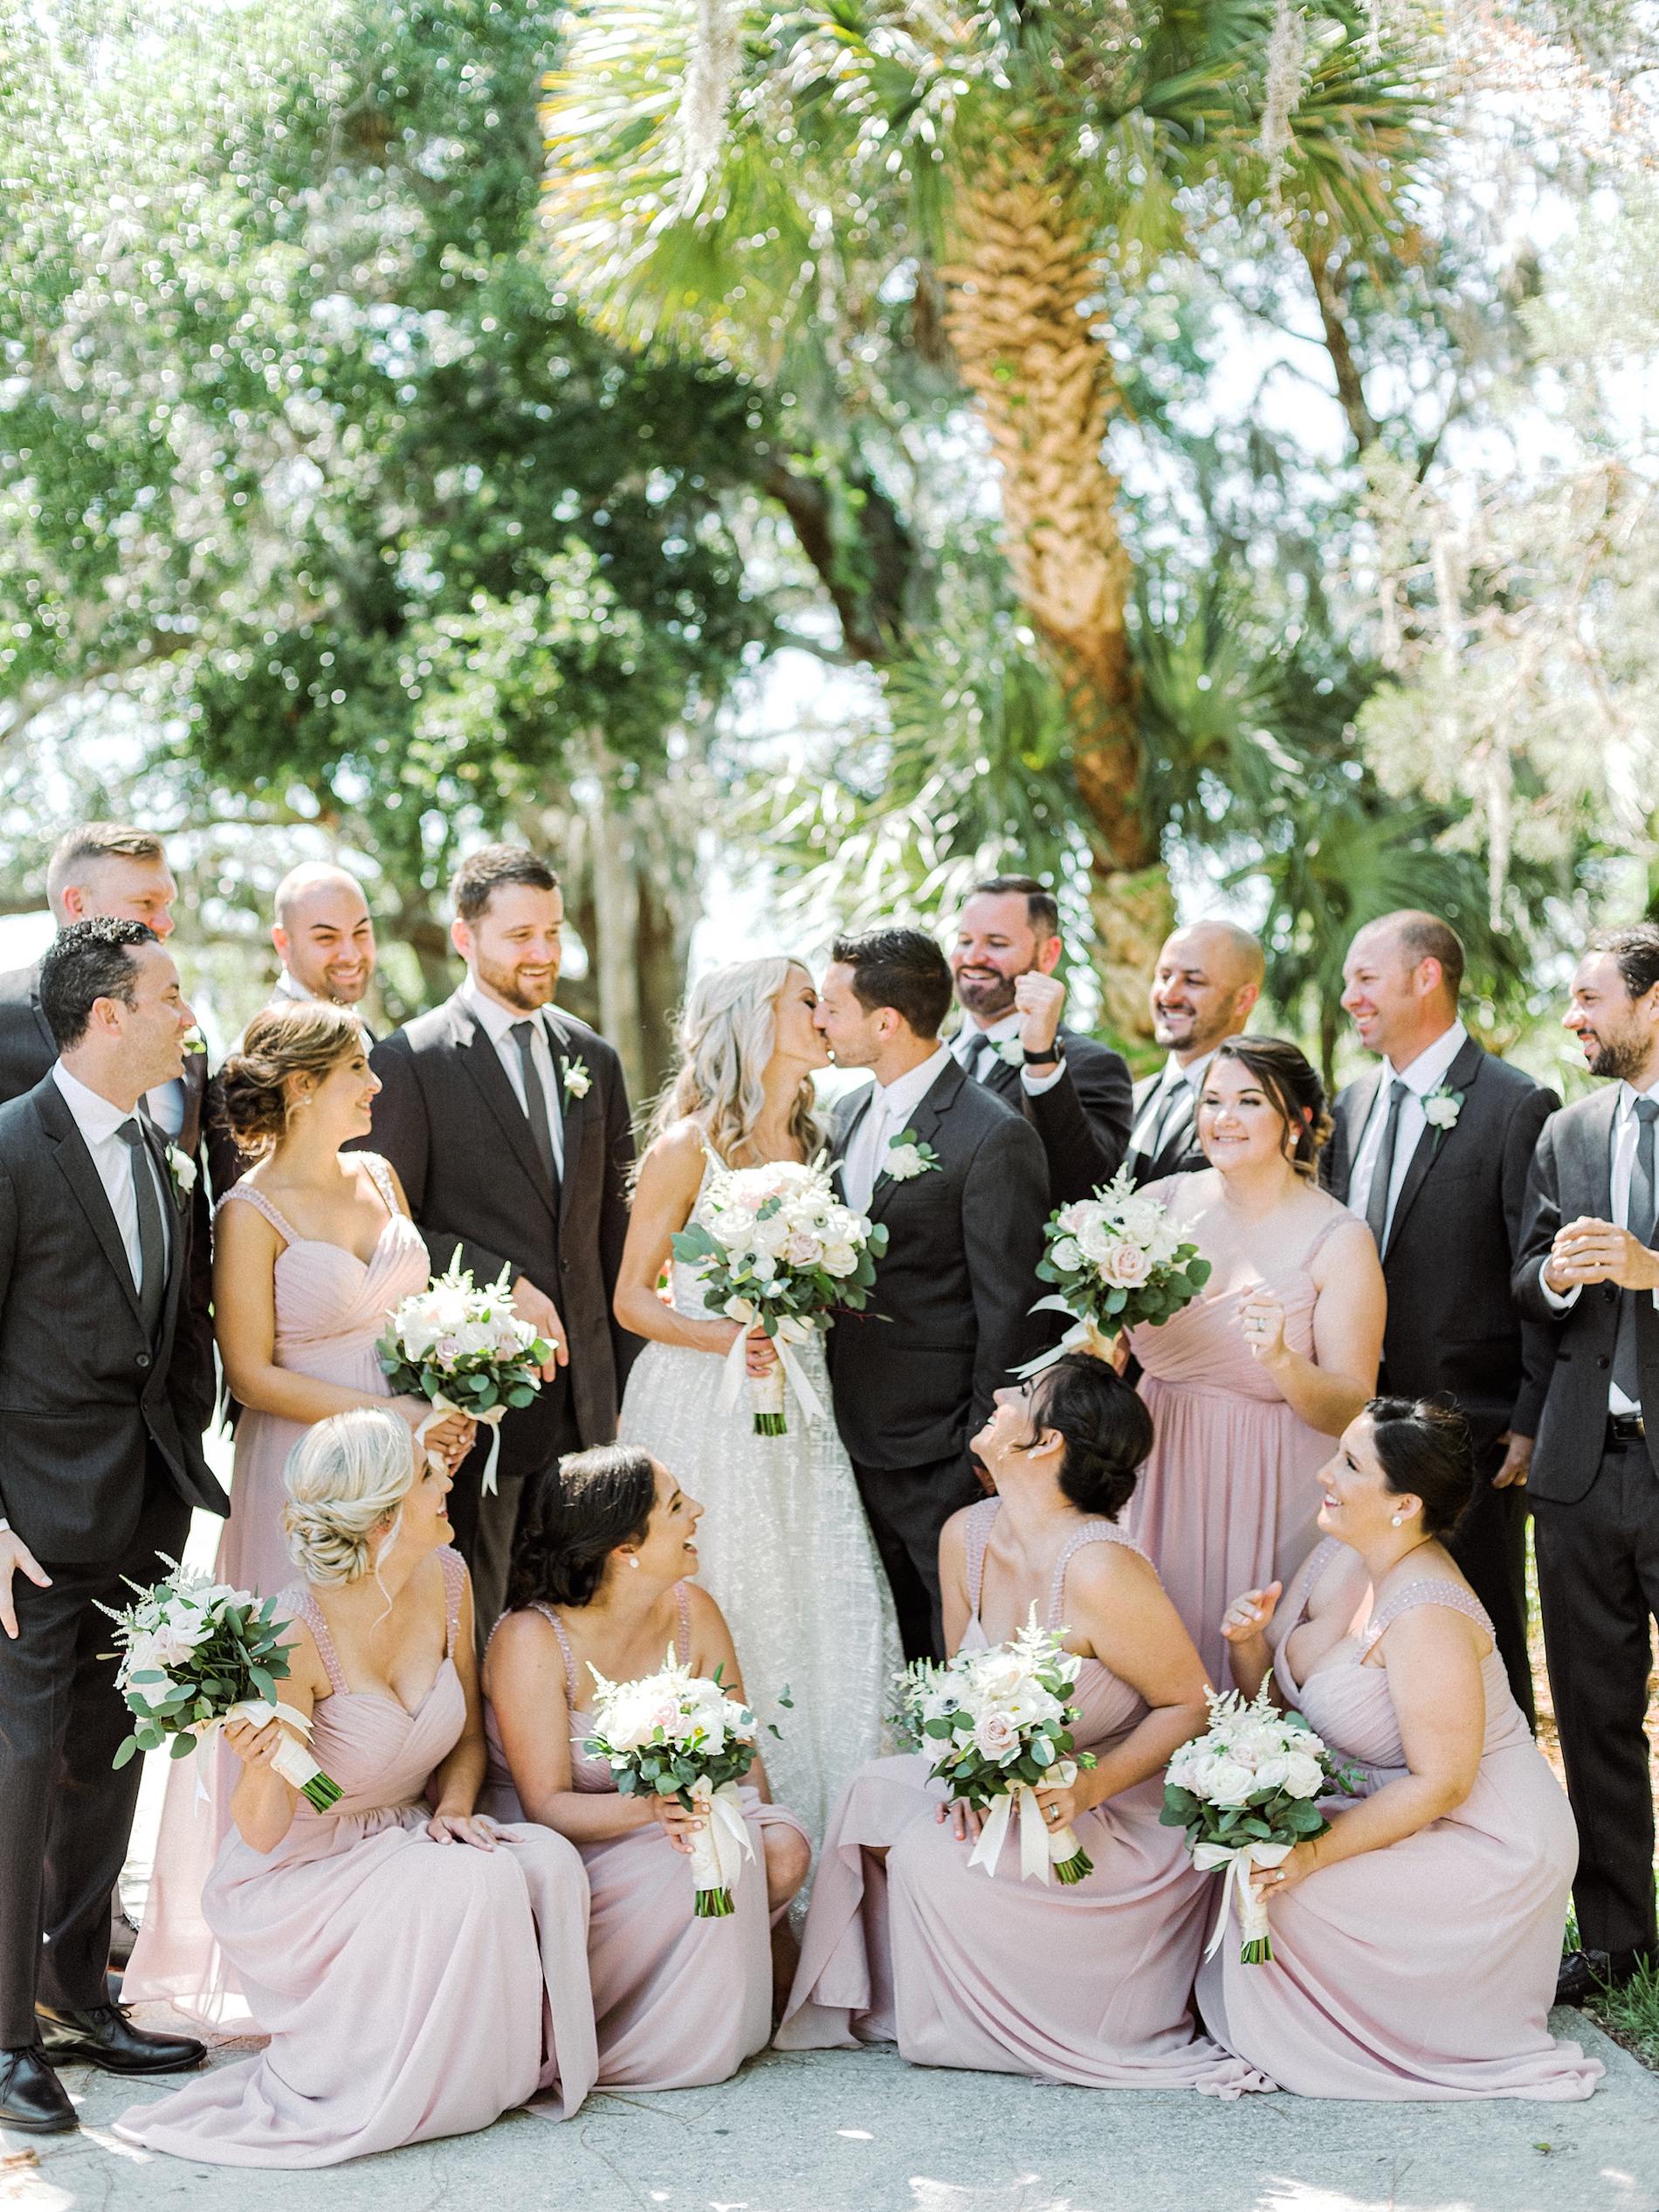 Sarasota Bride and Groom Kissing, Bridesmaids in Blush Pink Dresses, Groomsmen in Gray Suits Wedding Party Portrait